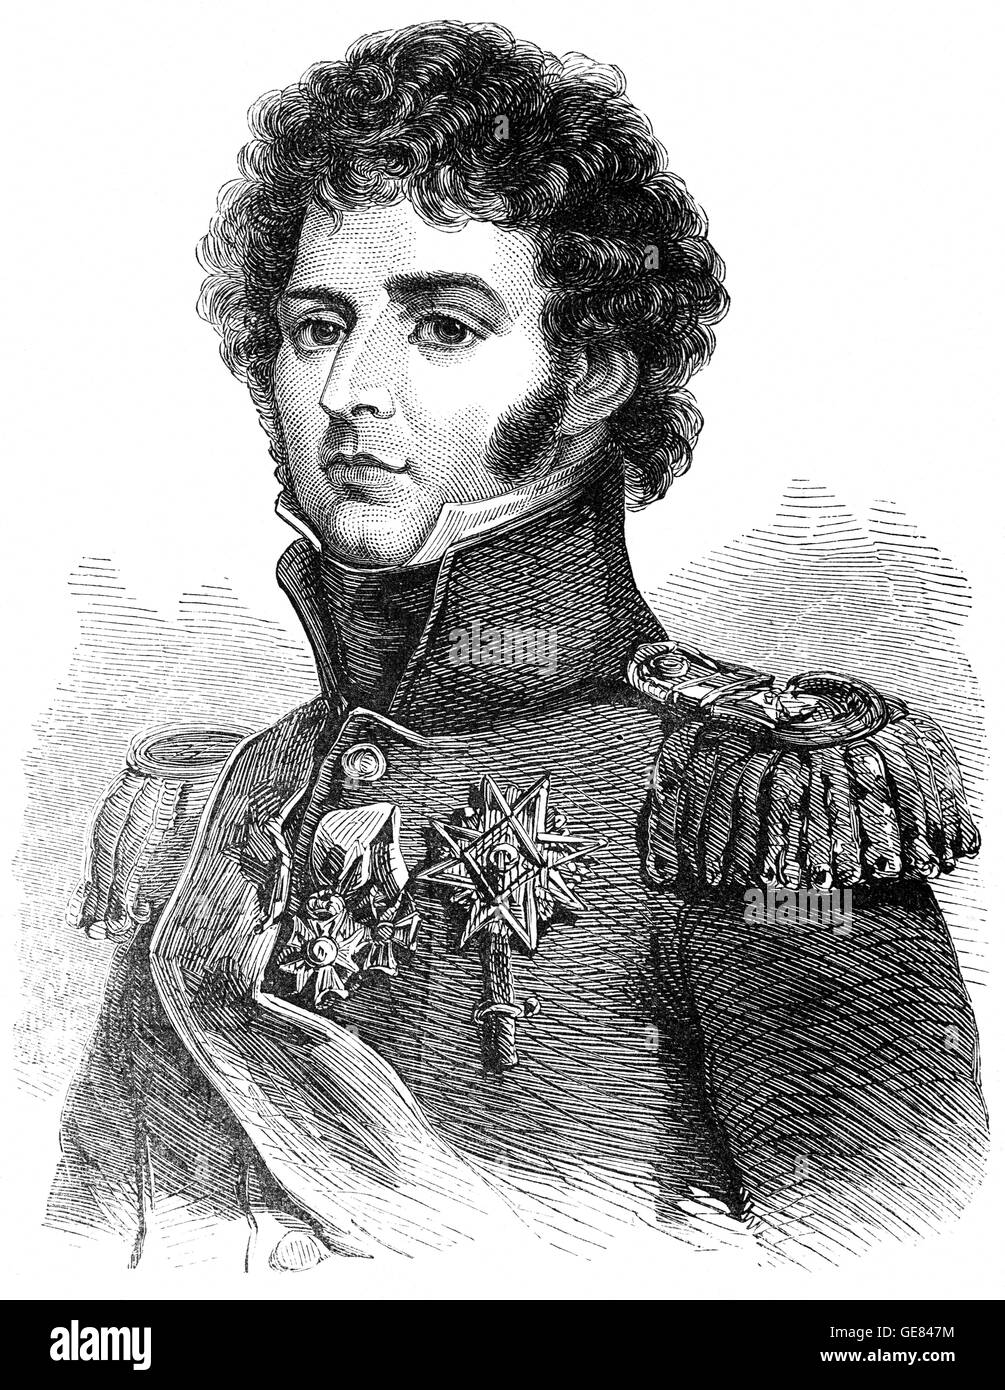 General Jean Bernadotte served a long career in the French Army. He was appointed as a Marshal of France by Napoleon I, though the two had a turbulent relationship. Napoleon made him Prince of Pontecorvo on 5 June 1806, but he stopped using that title in 1810 when his service to France ended and he was elected the heir-presumptive to the childless King Charles XIII of Sweden. Stock Photo